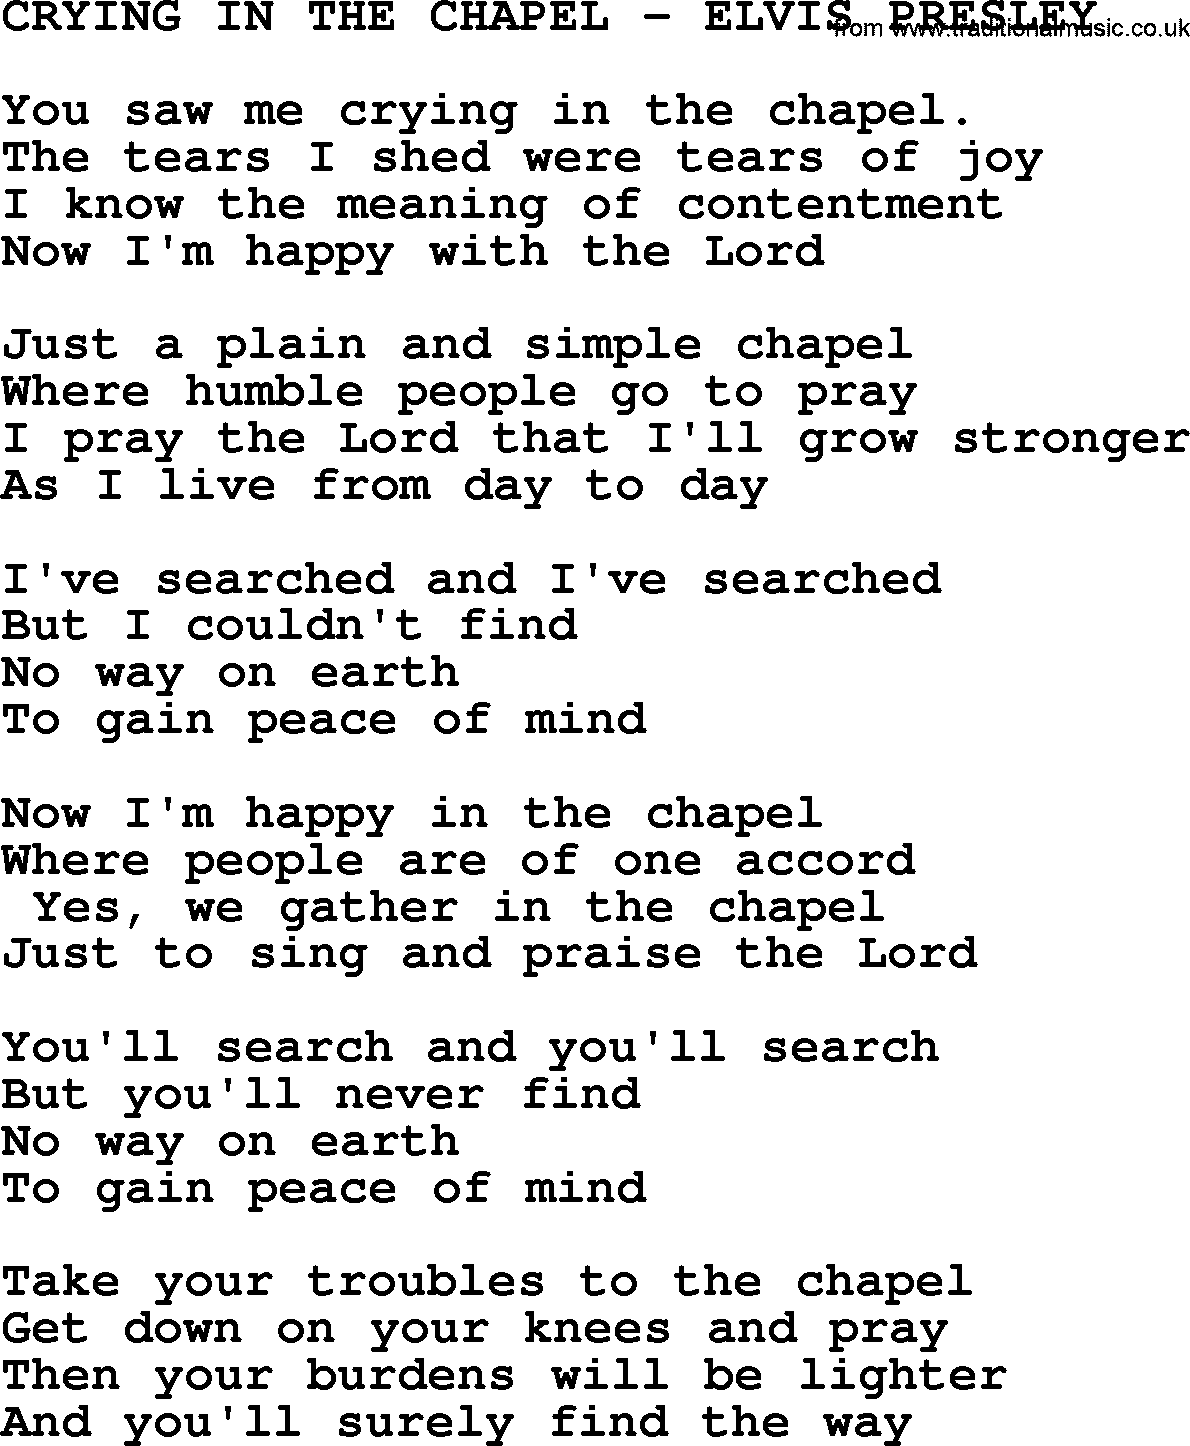 Elvis Presley song: Crying In The Chapel-Elvis Presley-.txt lyrics and chords